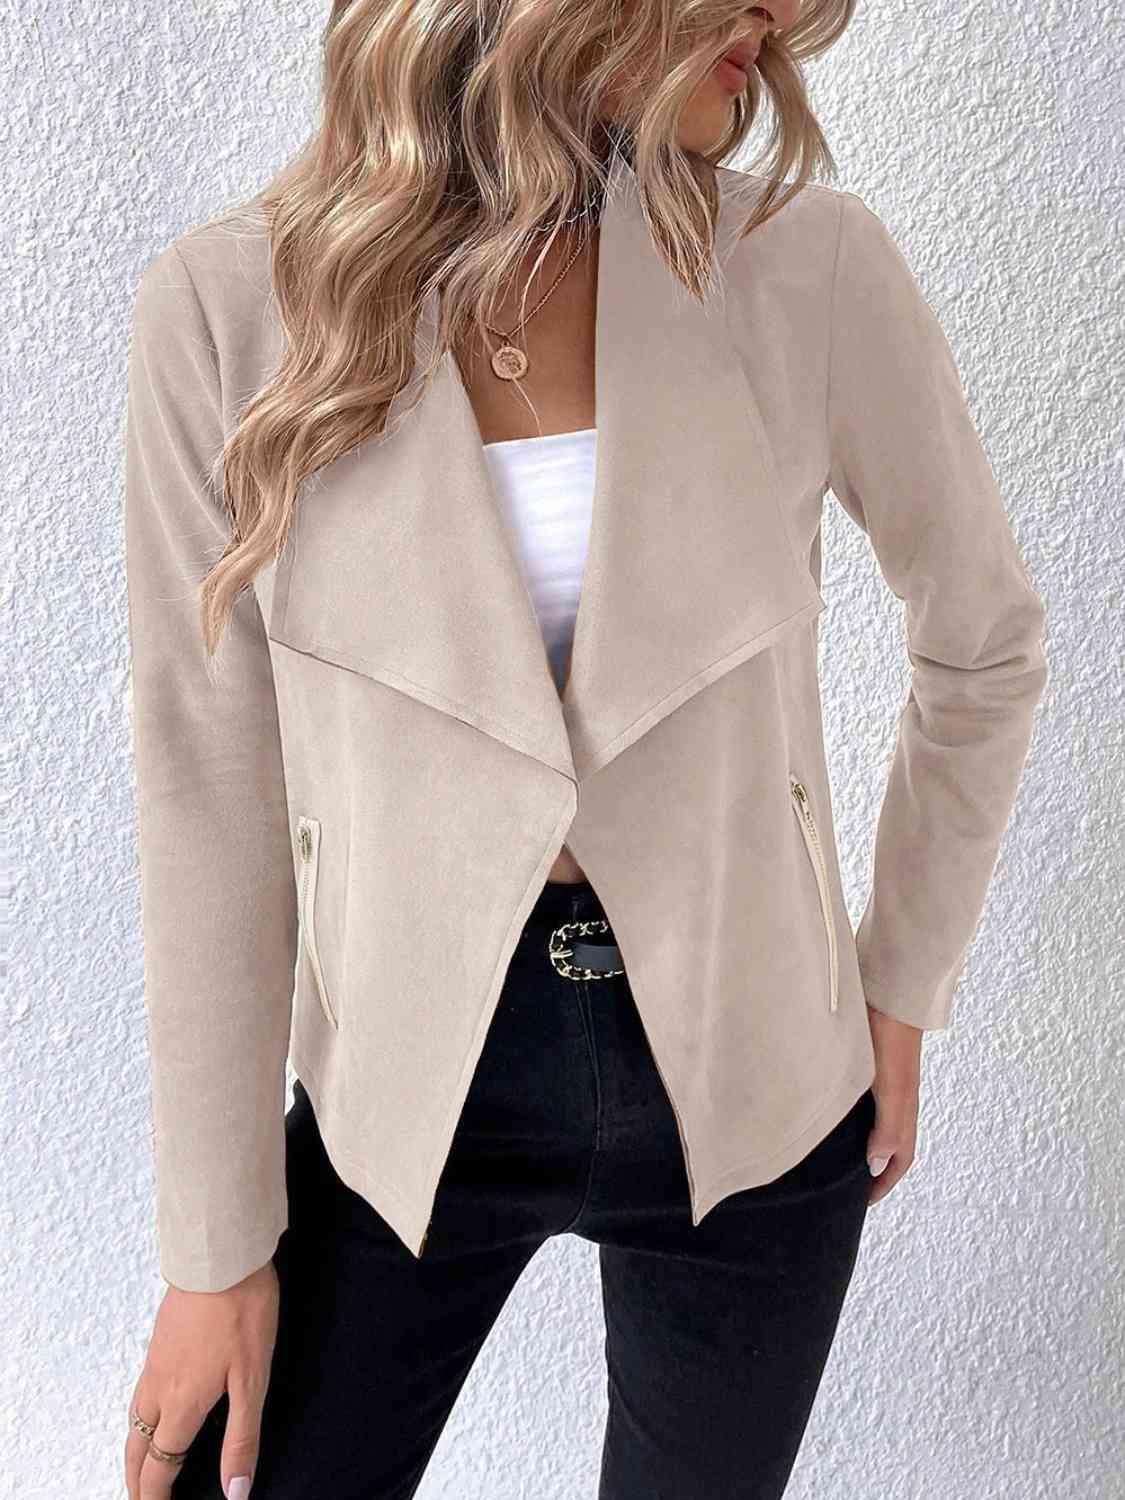 a woman wearing a beige jacket and jeans